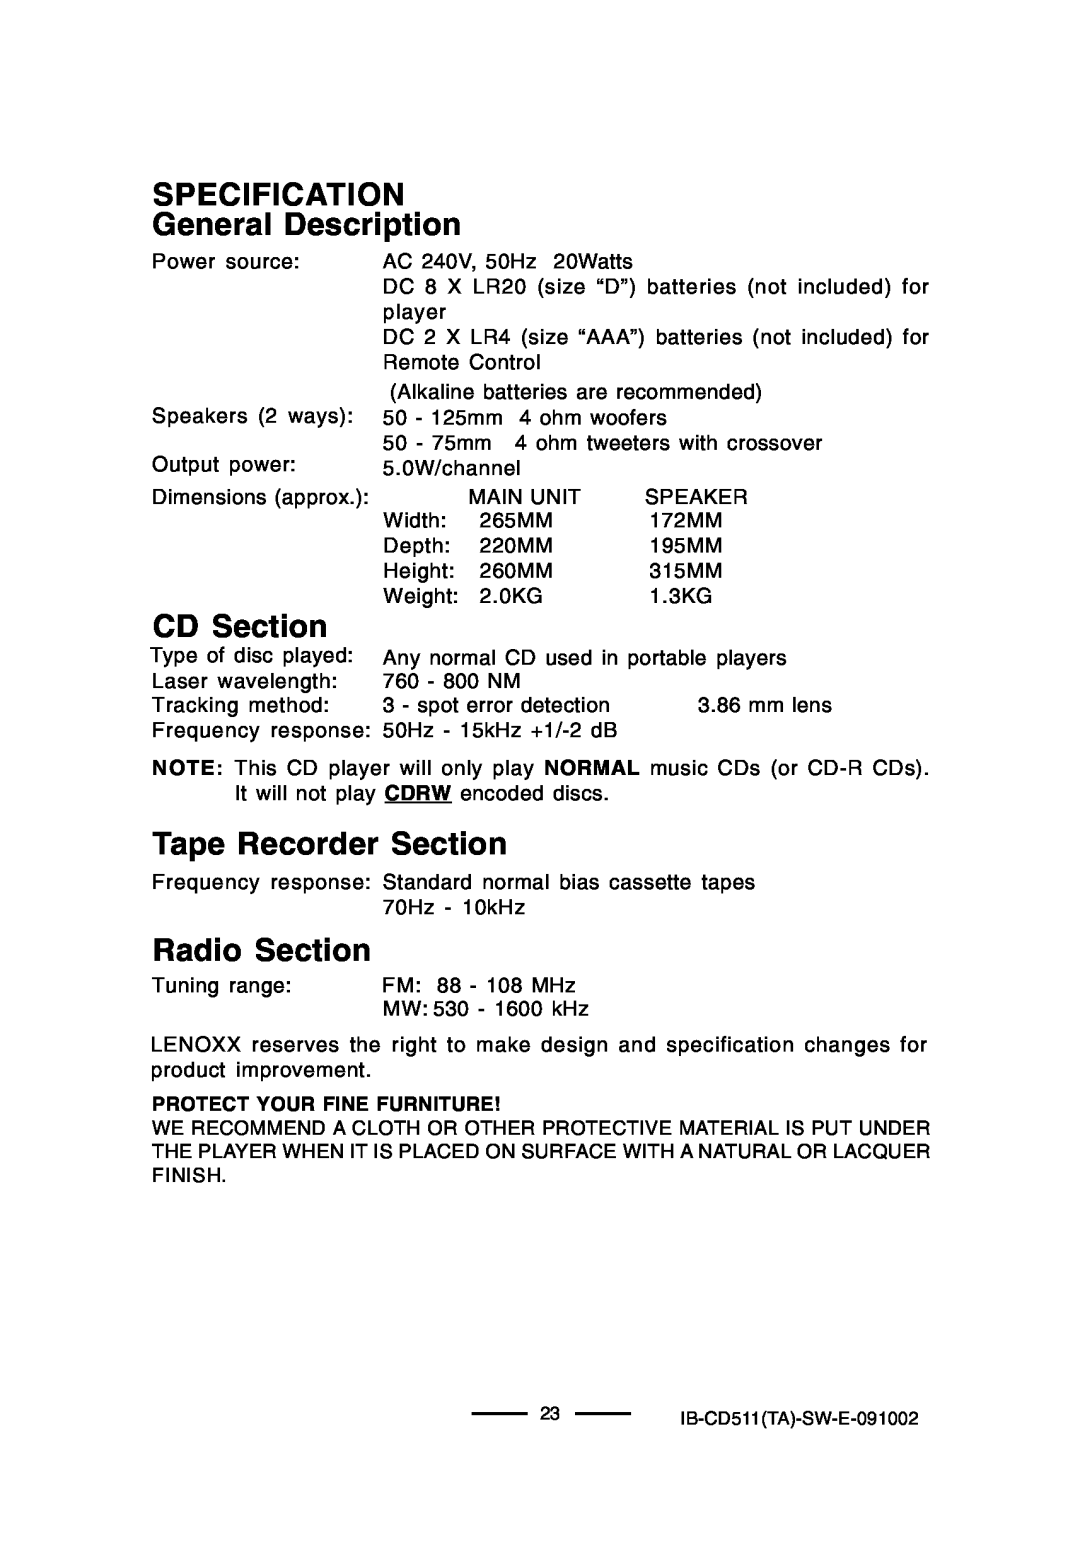 Lenoxx Electronics CD-511 manual SPECIFICATION General Description, CD Section, Tape Recorder Section, Radio Section 